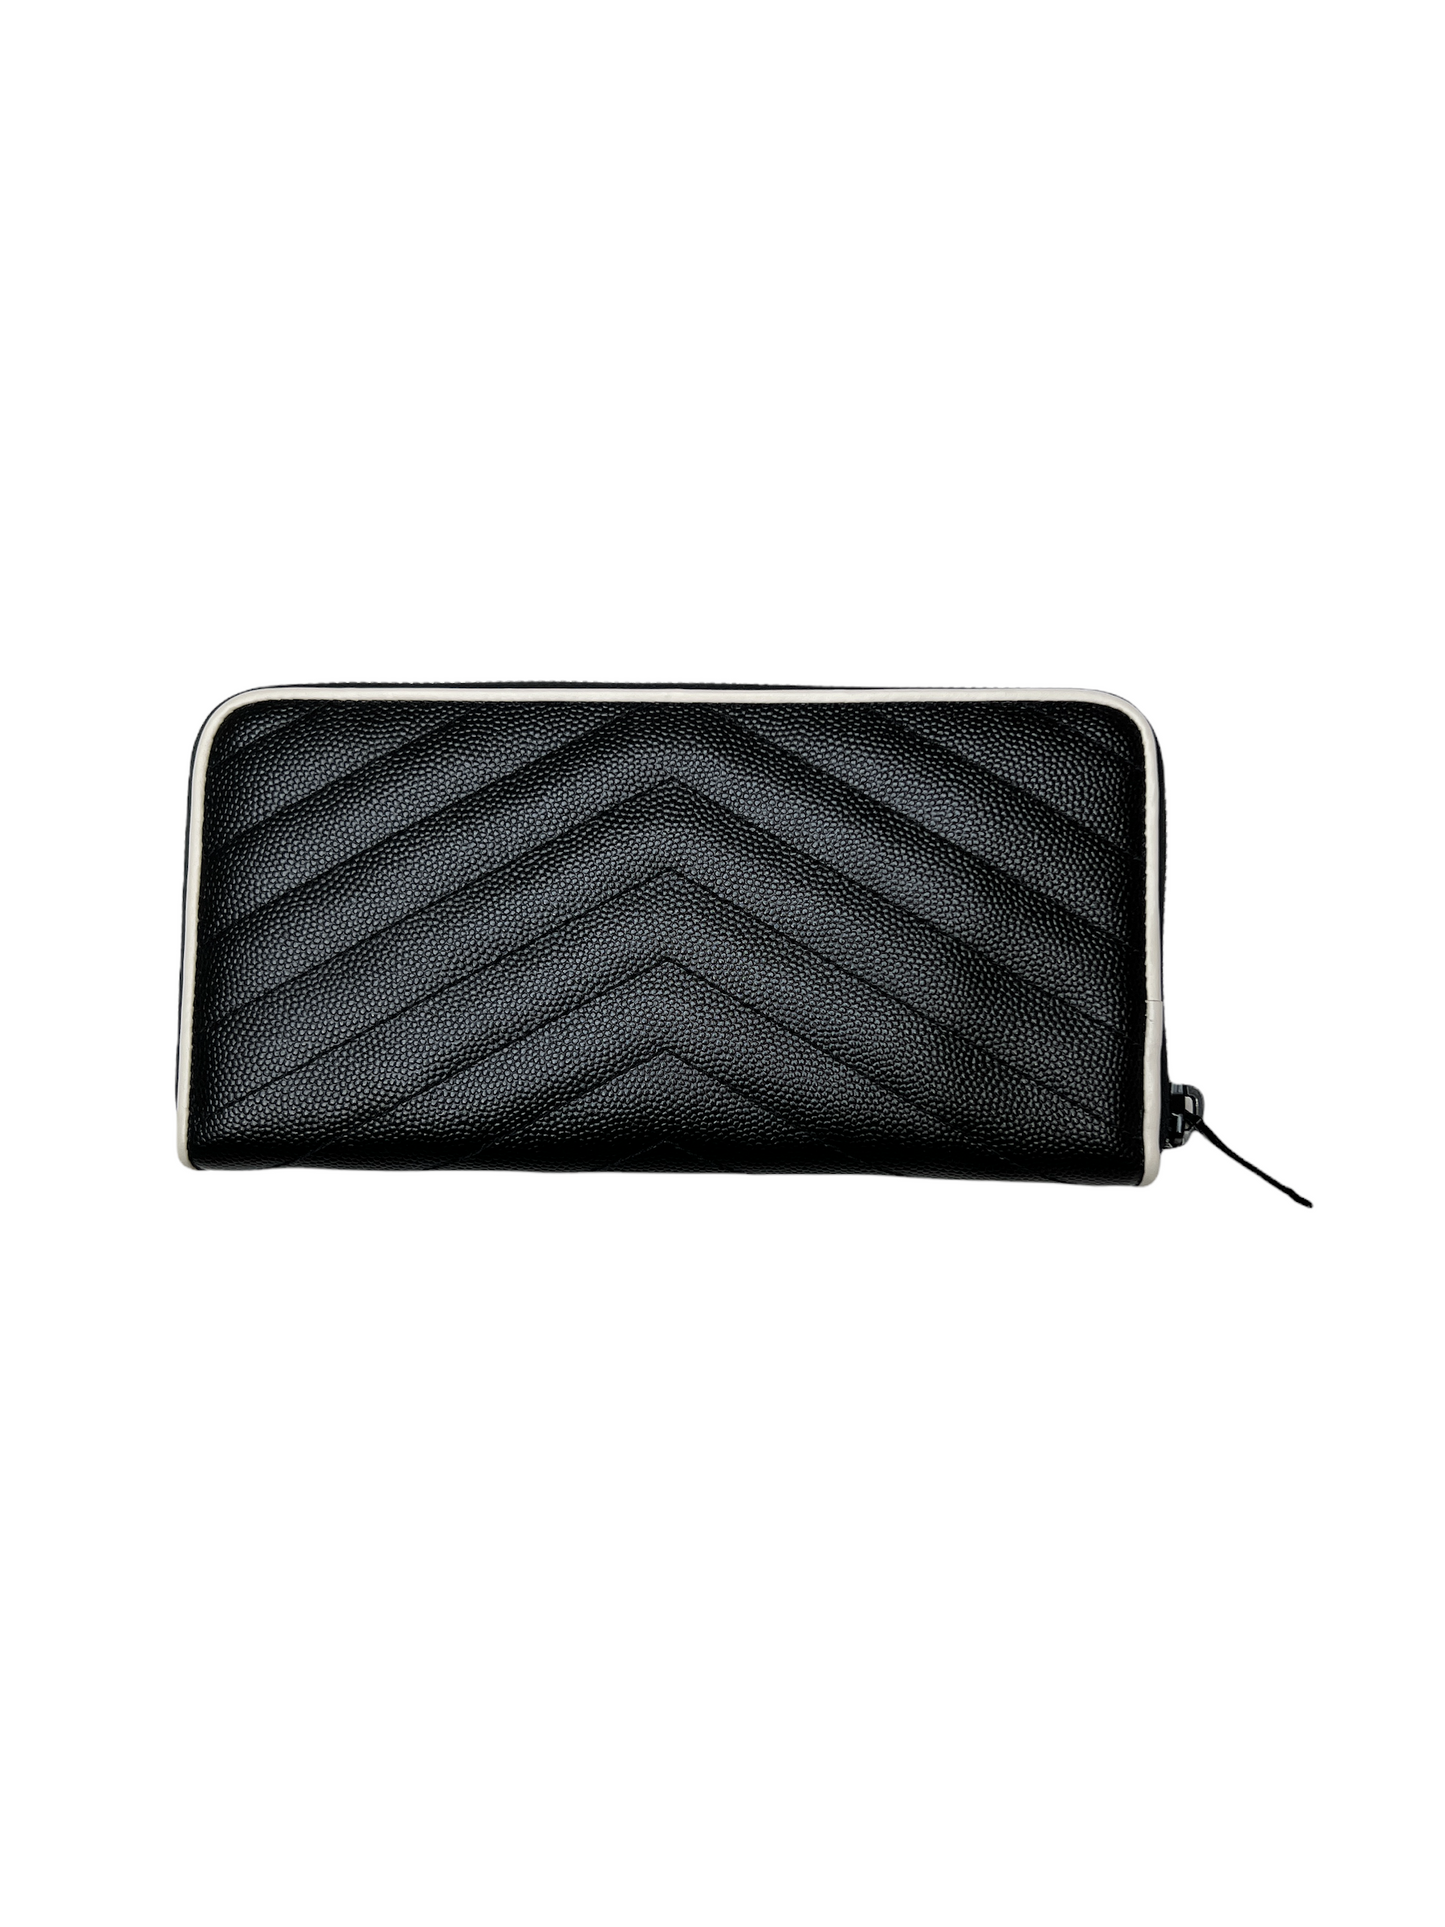 Black & White Leather Continental Wallet